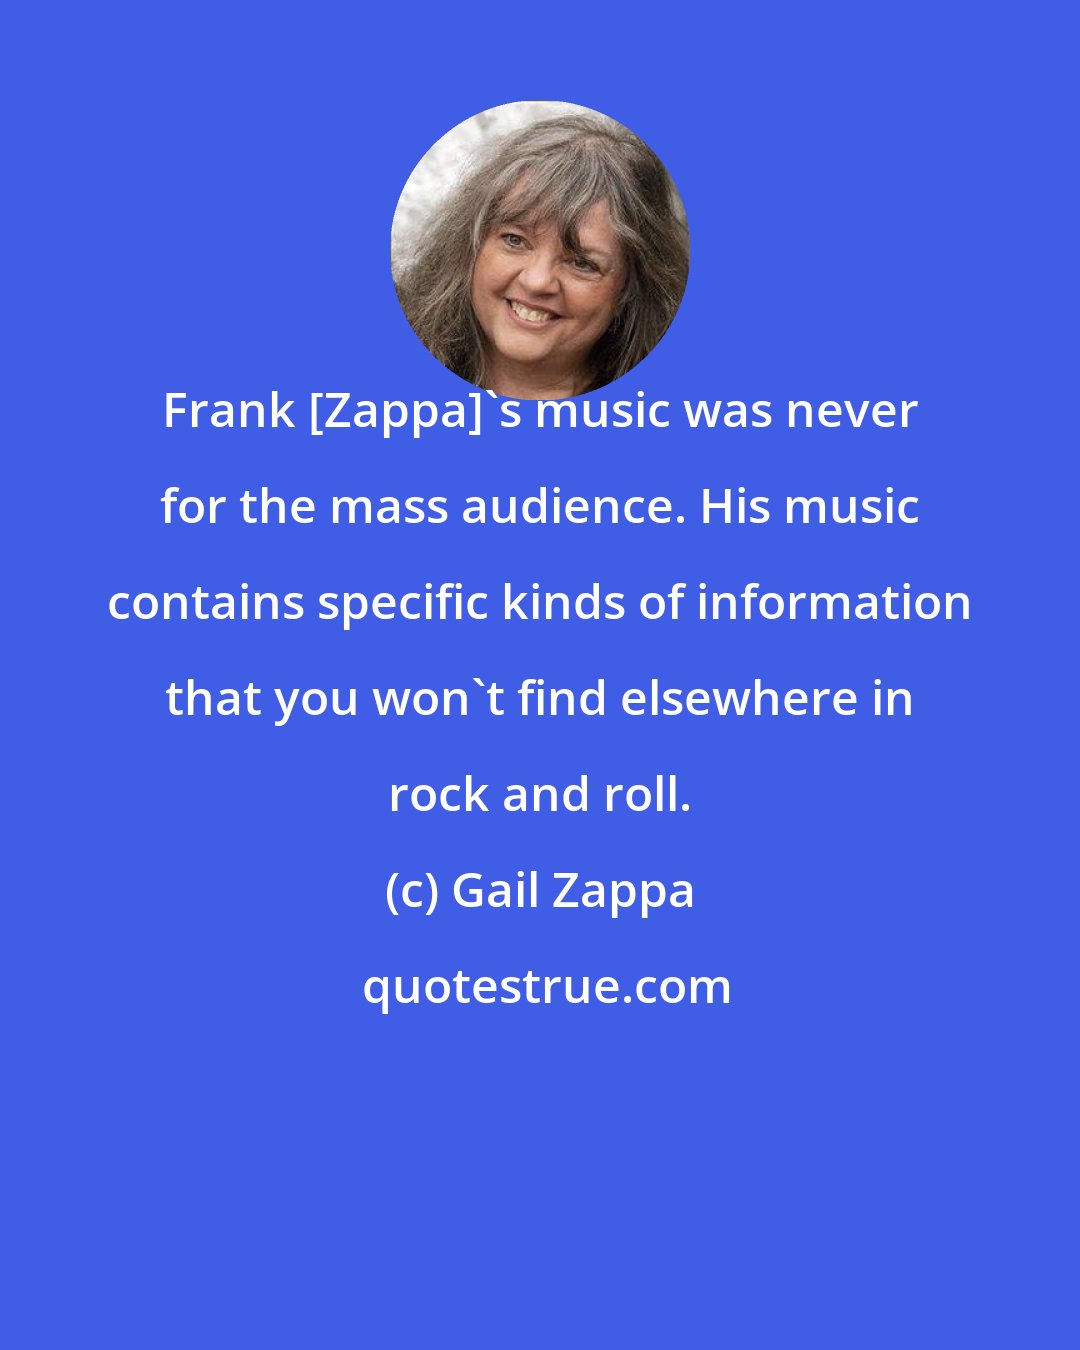 Gail Zappa: Frank [Zappa]'s music was never for the mass audience. His music contains specific kinds of information that you won't find elsewhere in rock and roll.